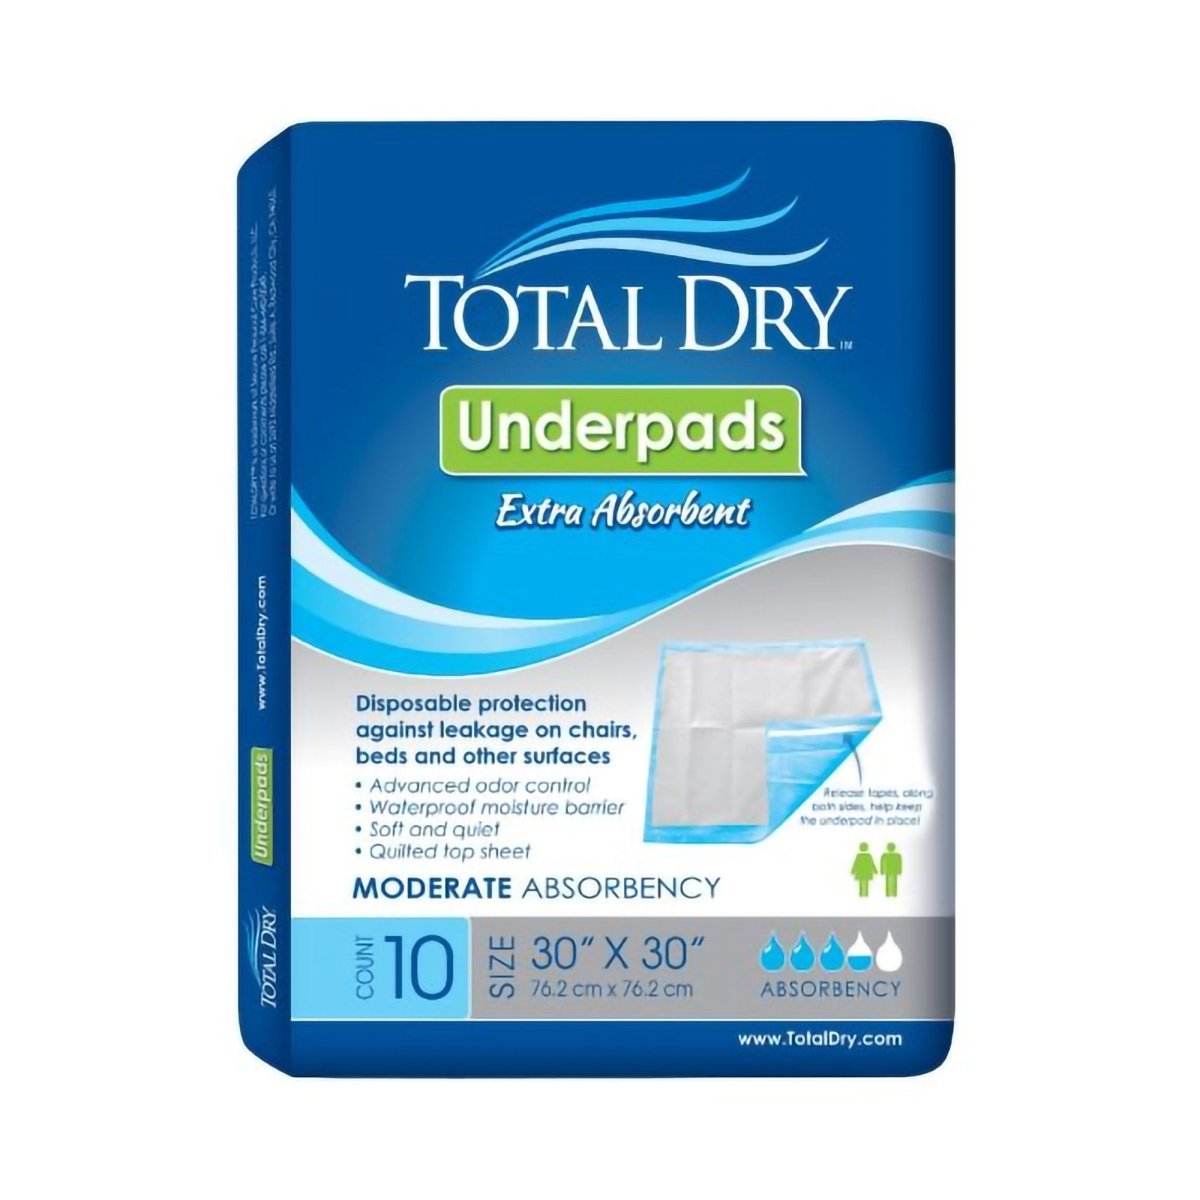 Totaldry Incontinence Underpads - 975698_BG - 1